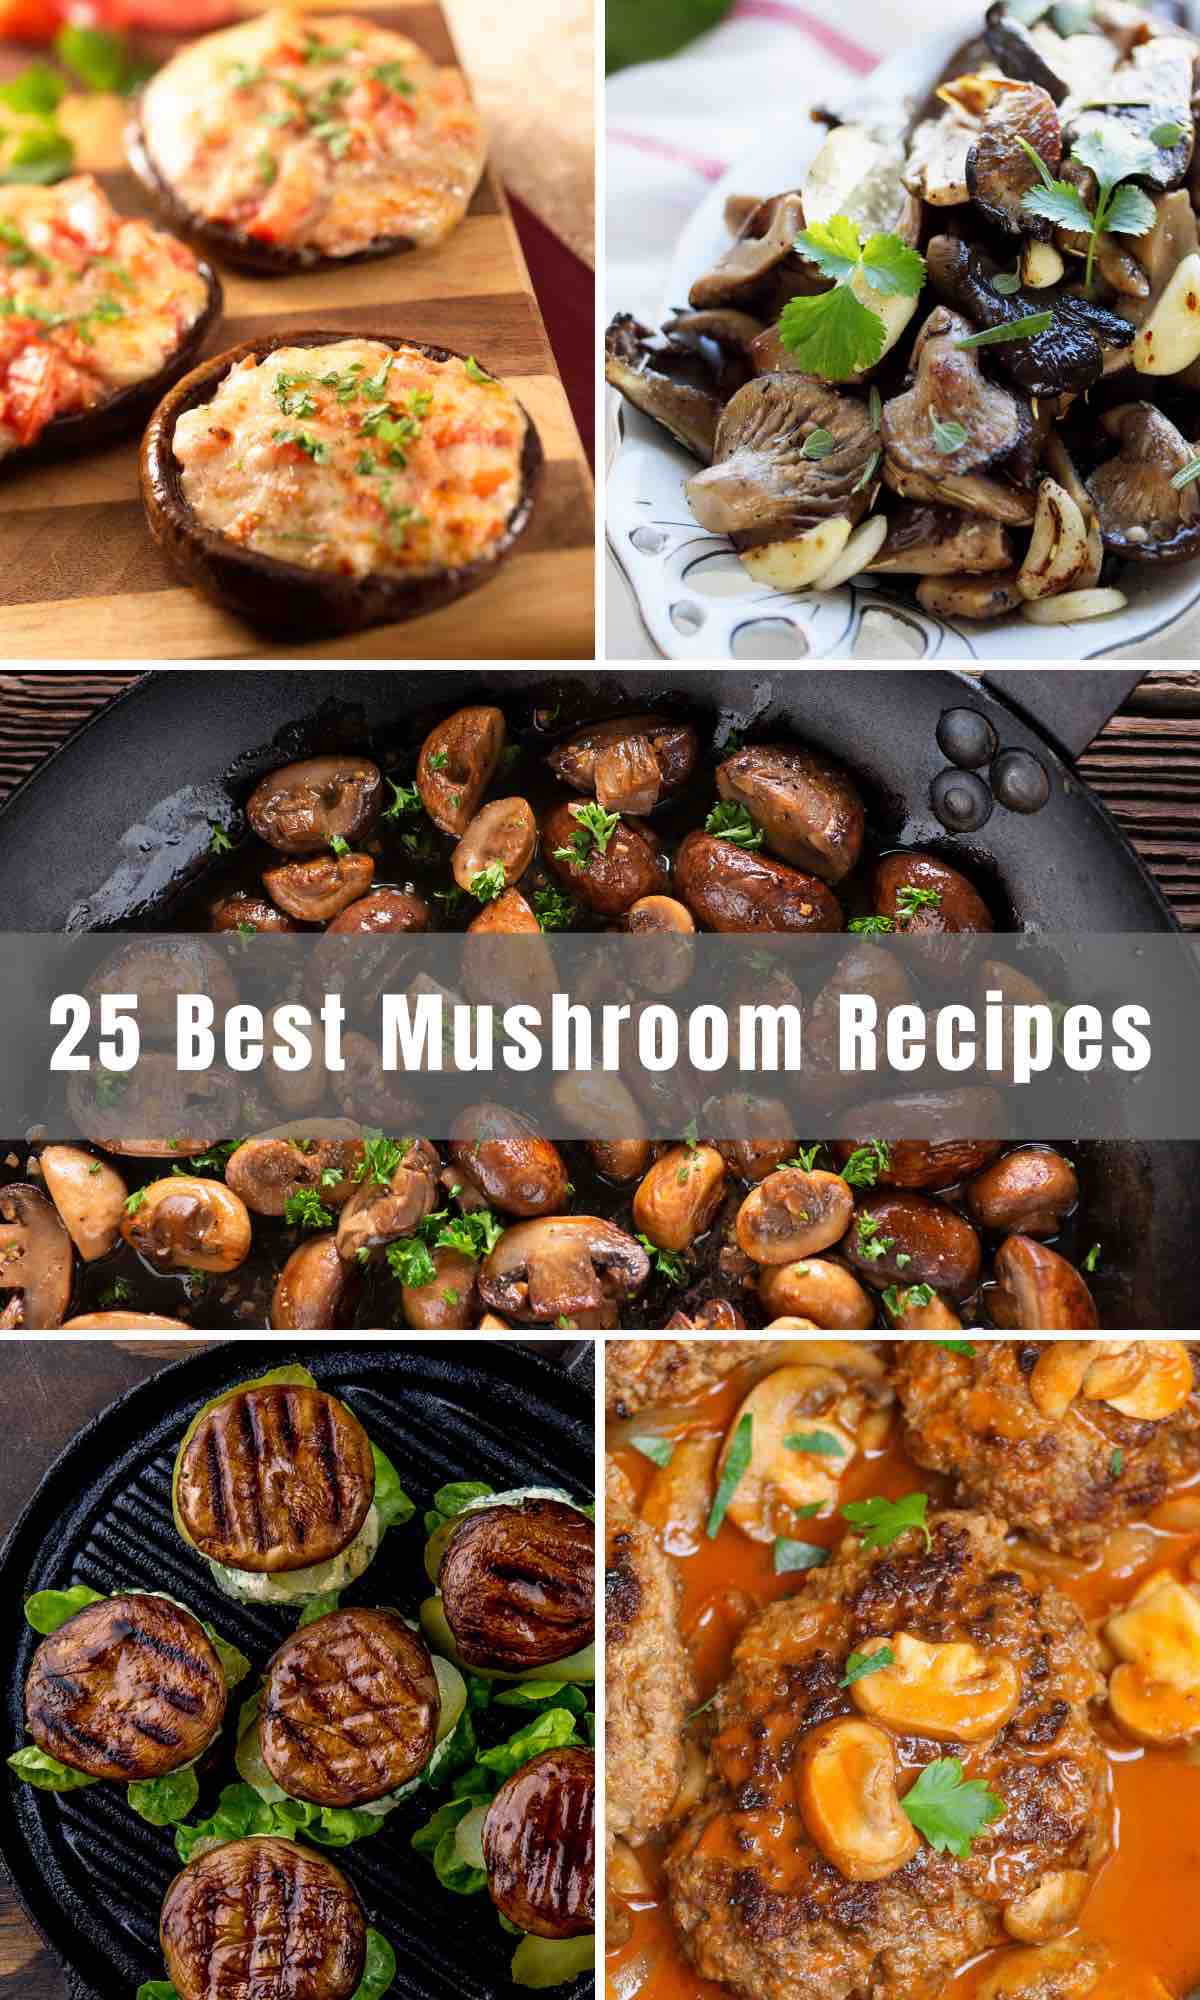 Mushrooms are tasty and versatile vegetables that are also very good for you. We’ve rounded up 25 Best Mushroom Recipes that even picky eaters won’t be able to resist. From pasta and pizza to burgers and appetizers, these fungi bring lots of flavor and texture to any dish.